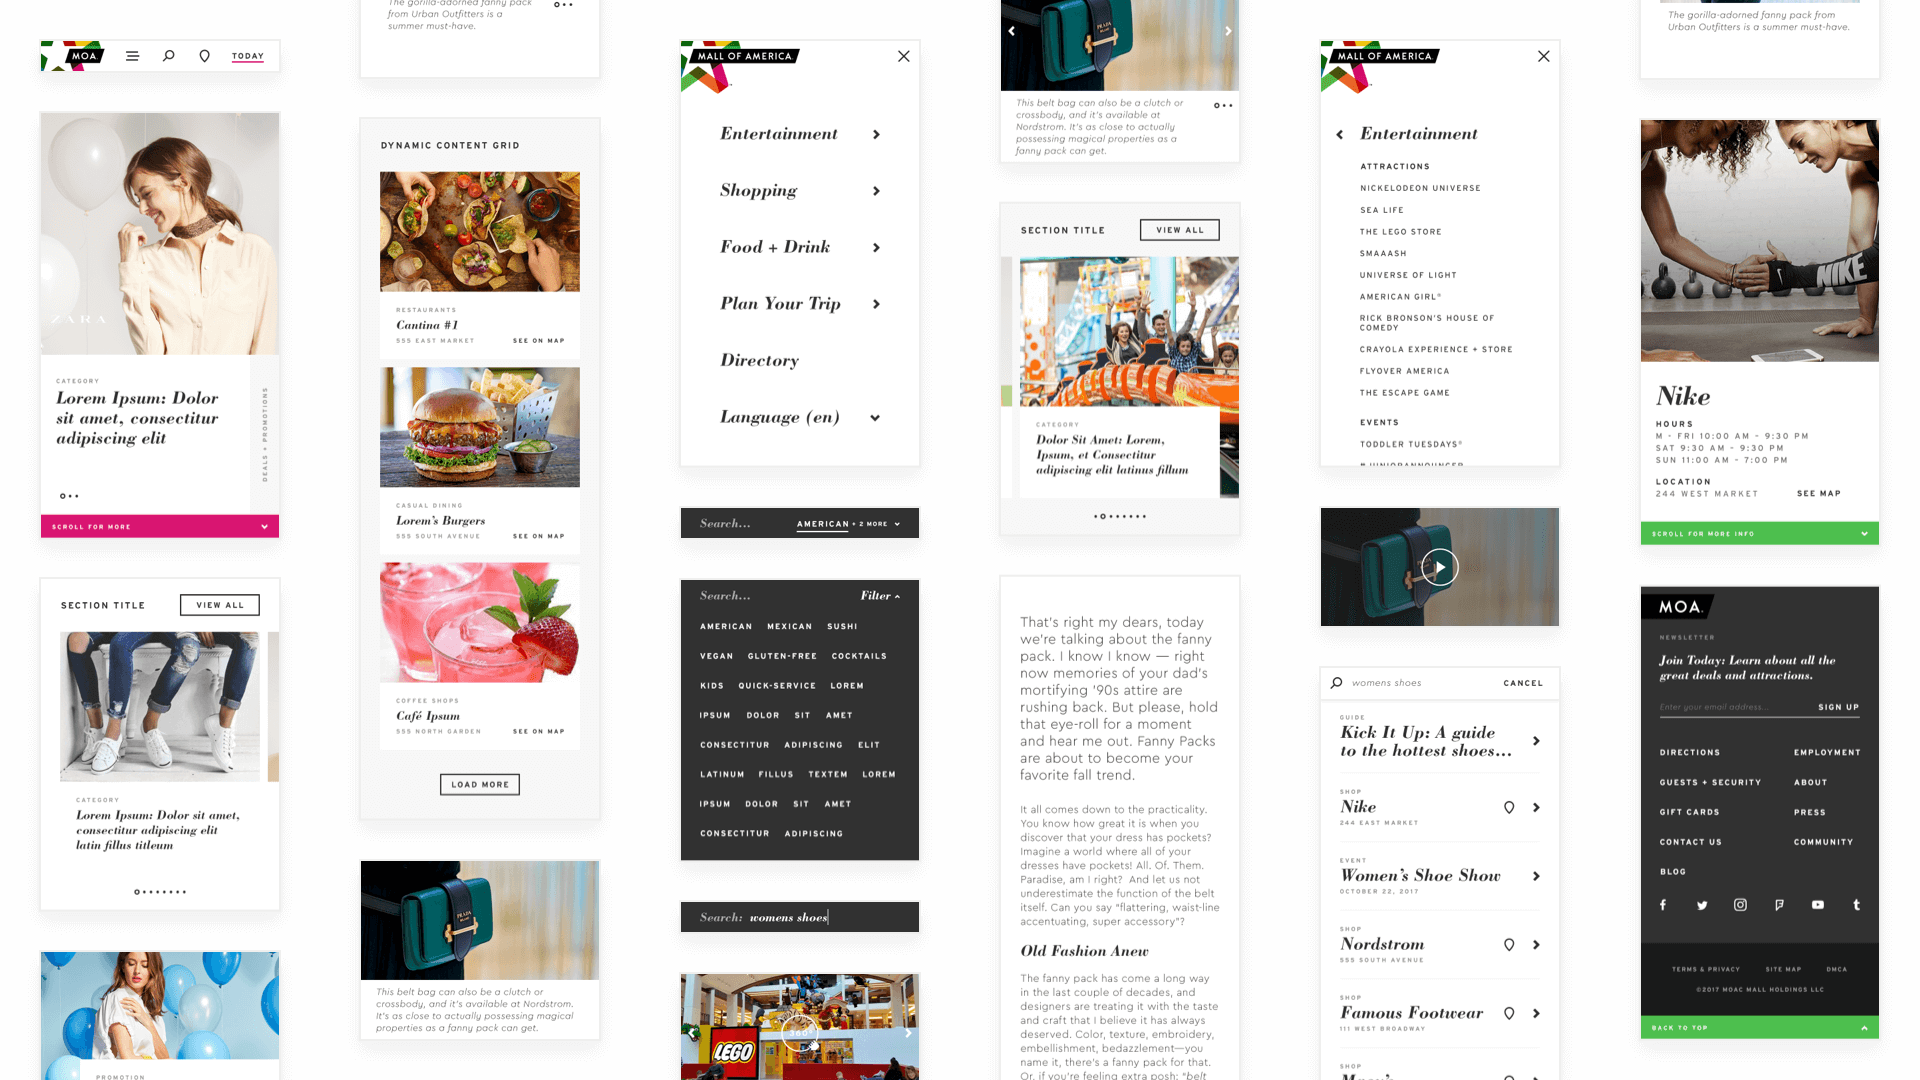 Mobile designs for the modules used on the redesigned Mall of America website